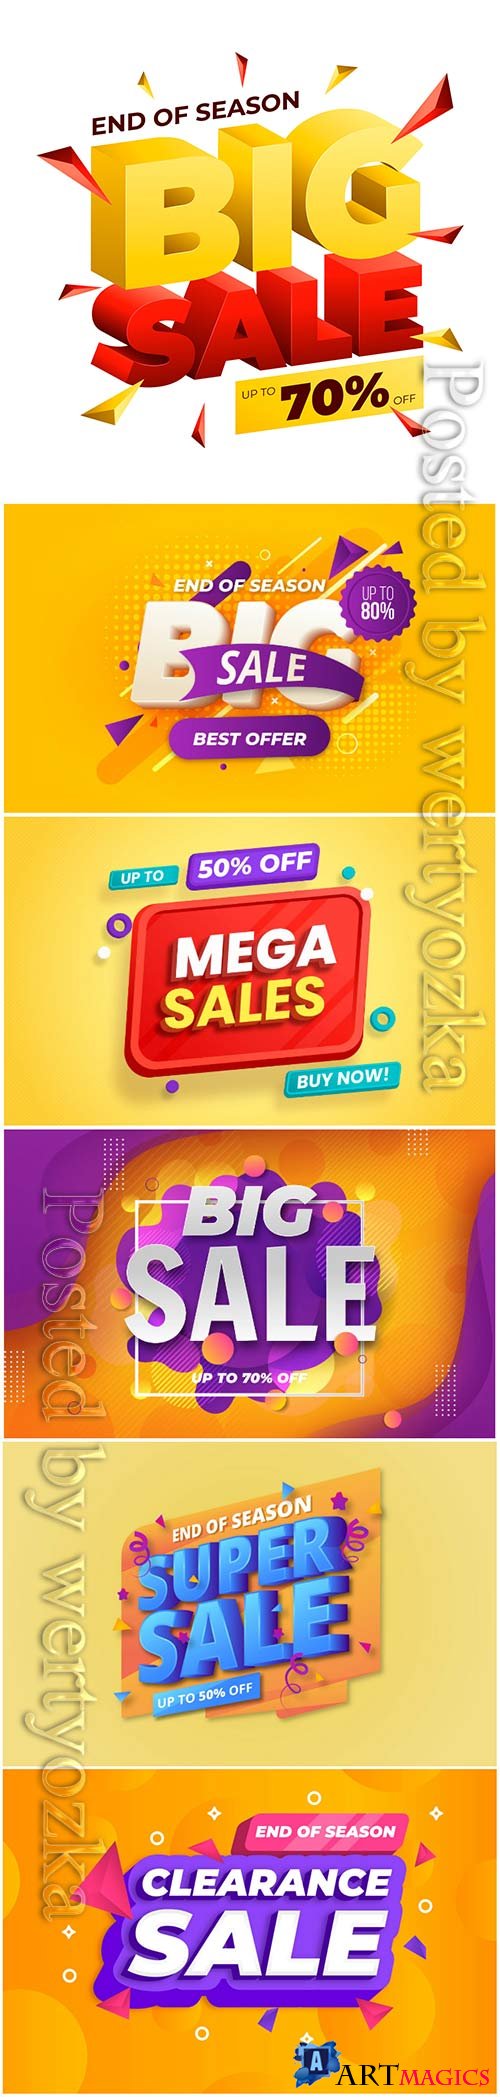 Colorful 3d sales vector background # 2